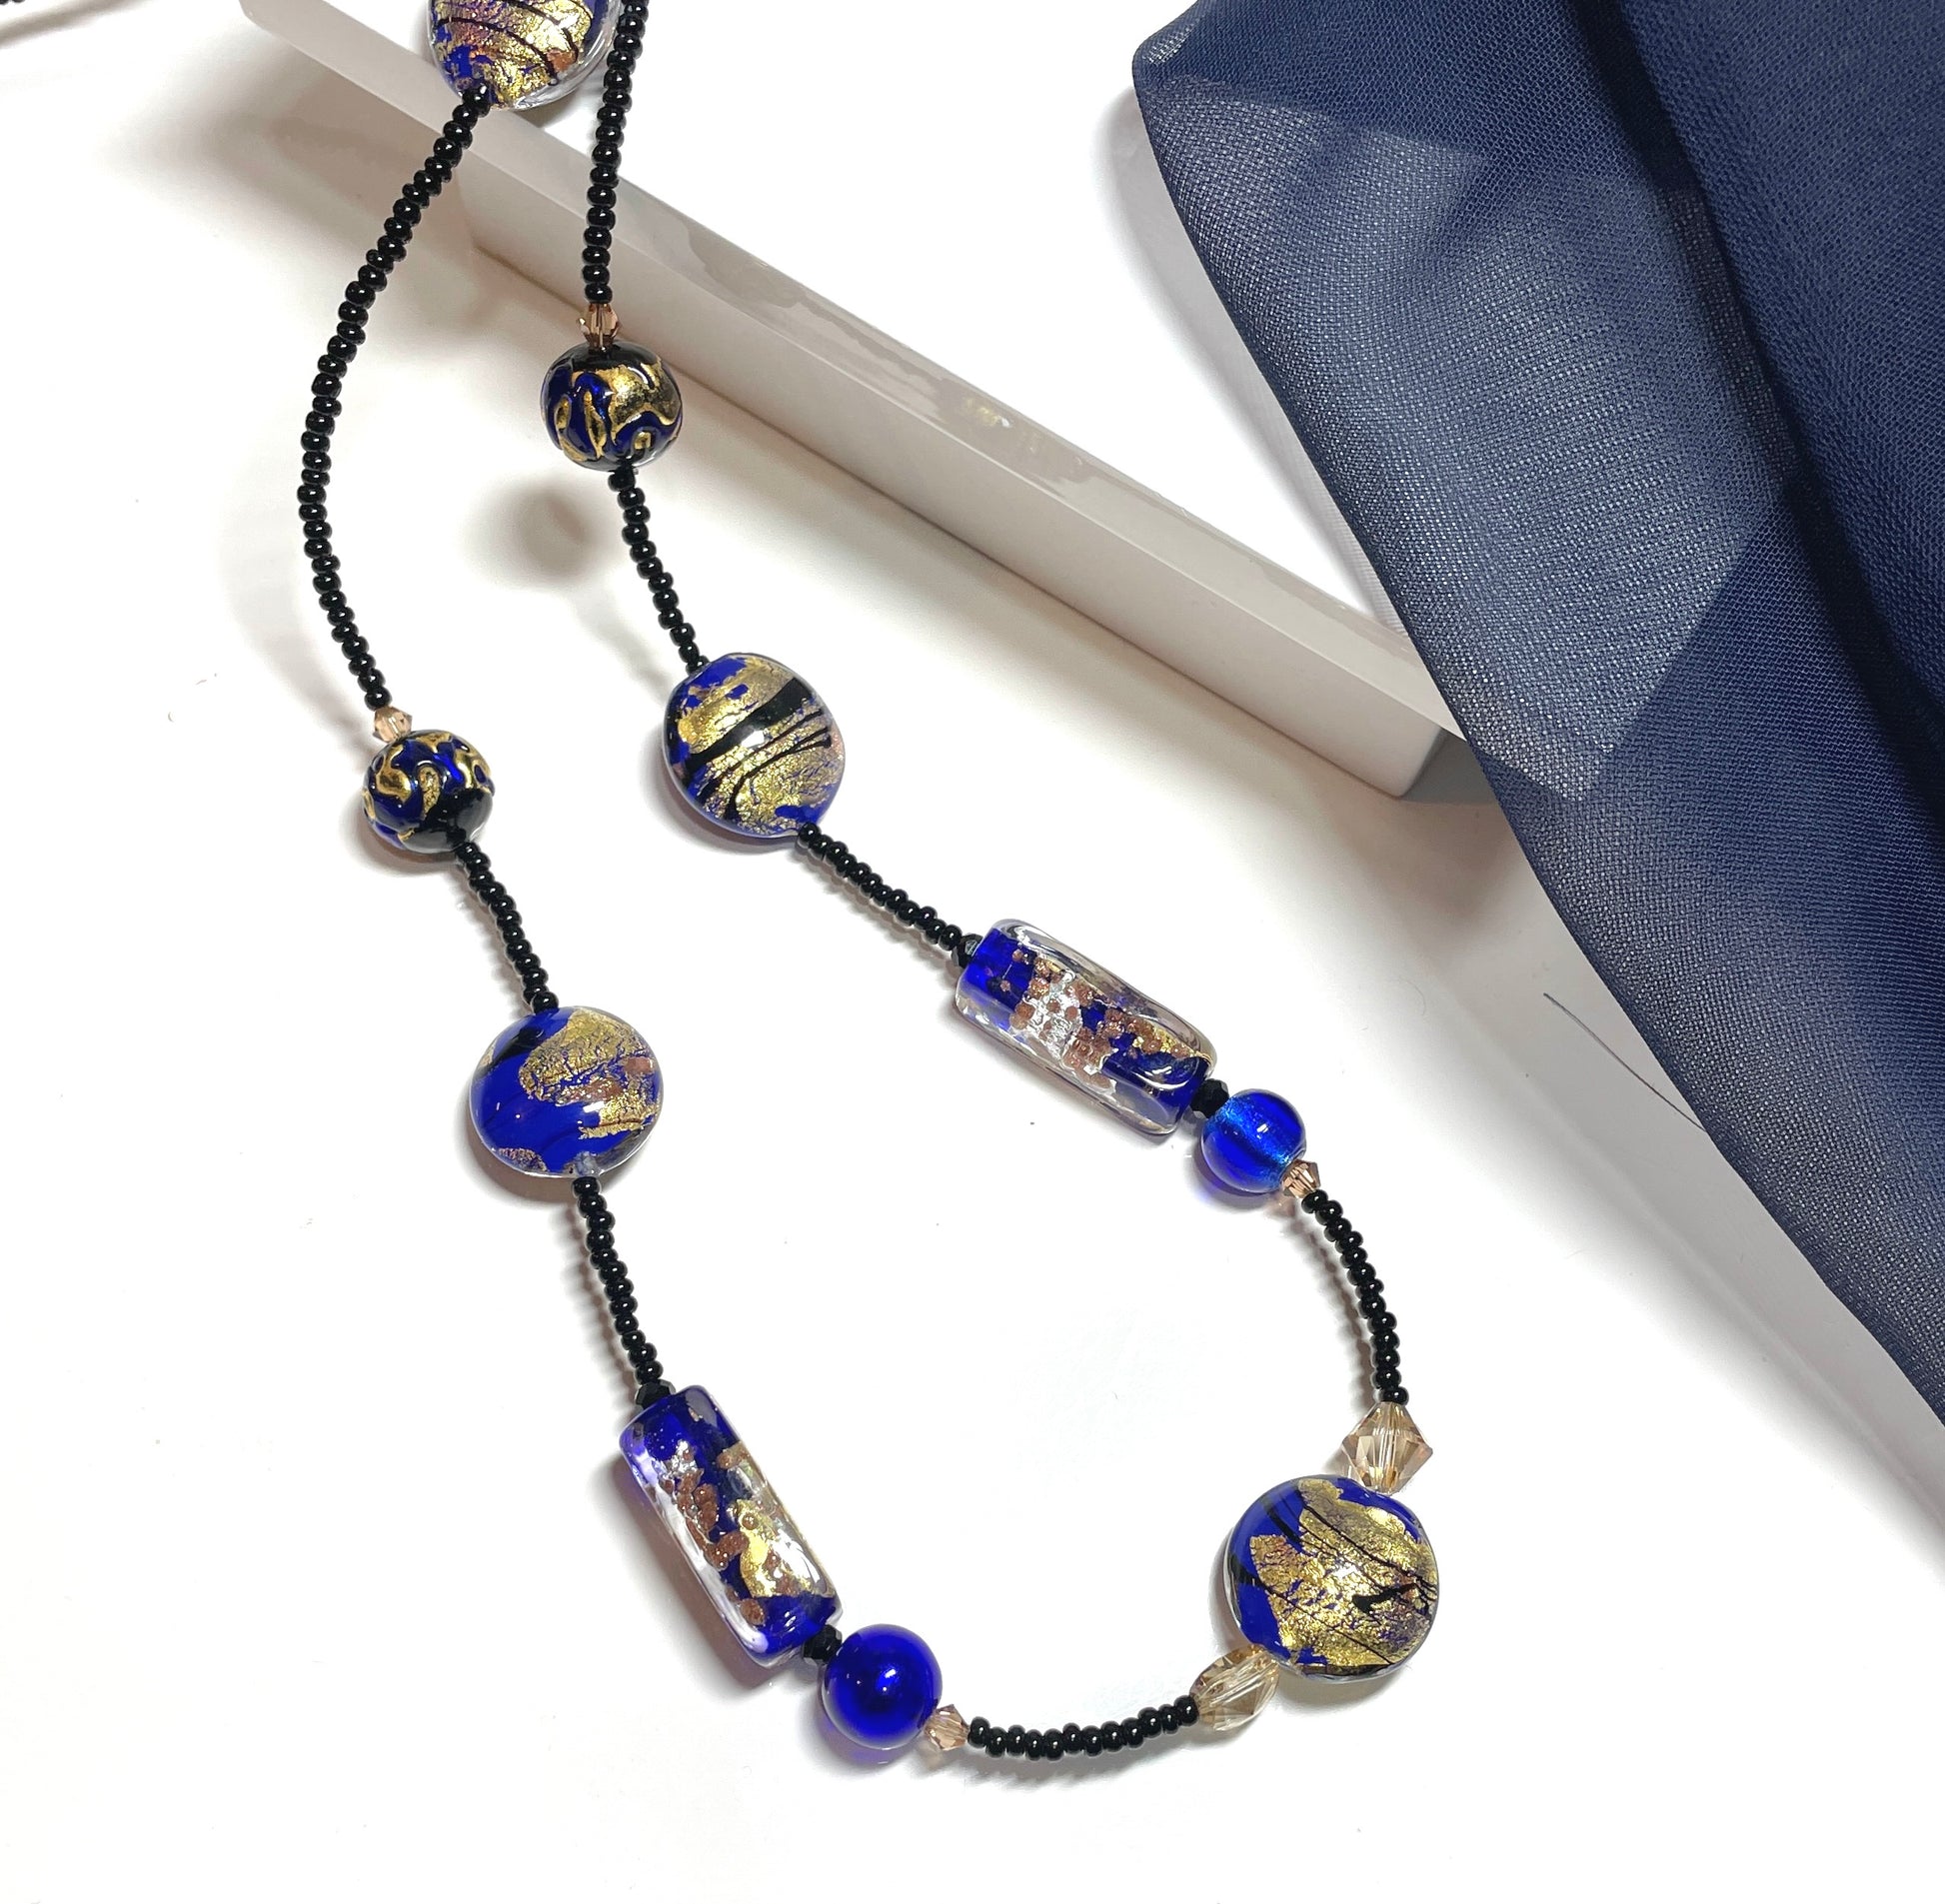 Colbalt blue and black Murano glass beaded necklace